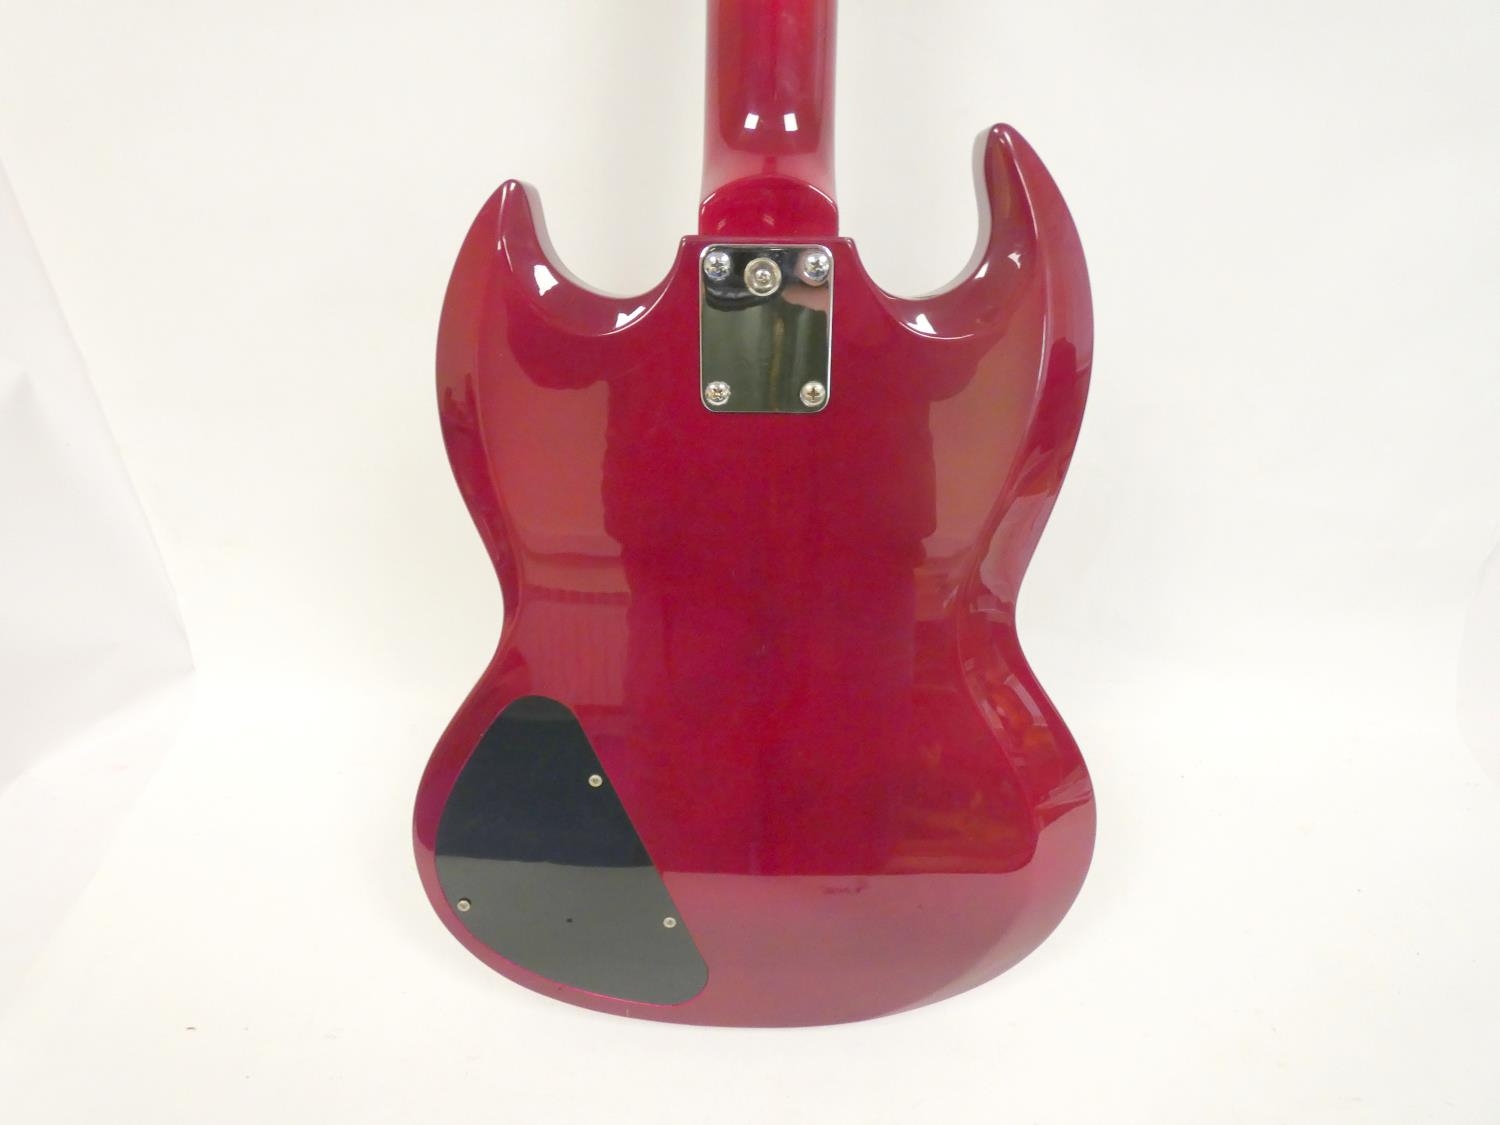 Encore six string electric guitar in maroon colour, 100cm in length. - Image 4 of 7